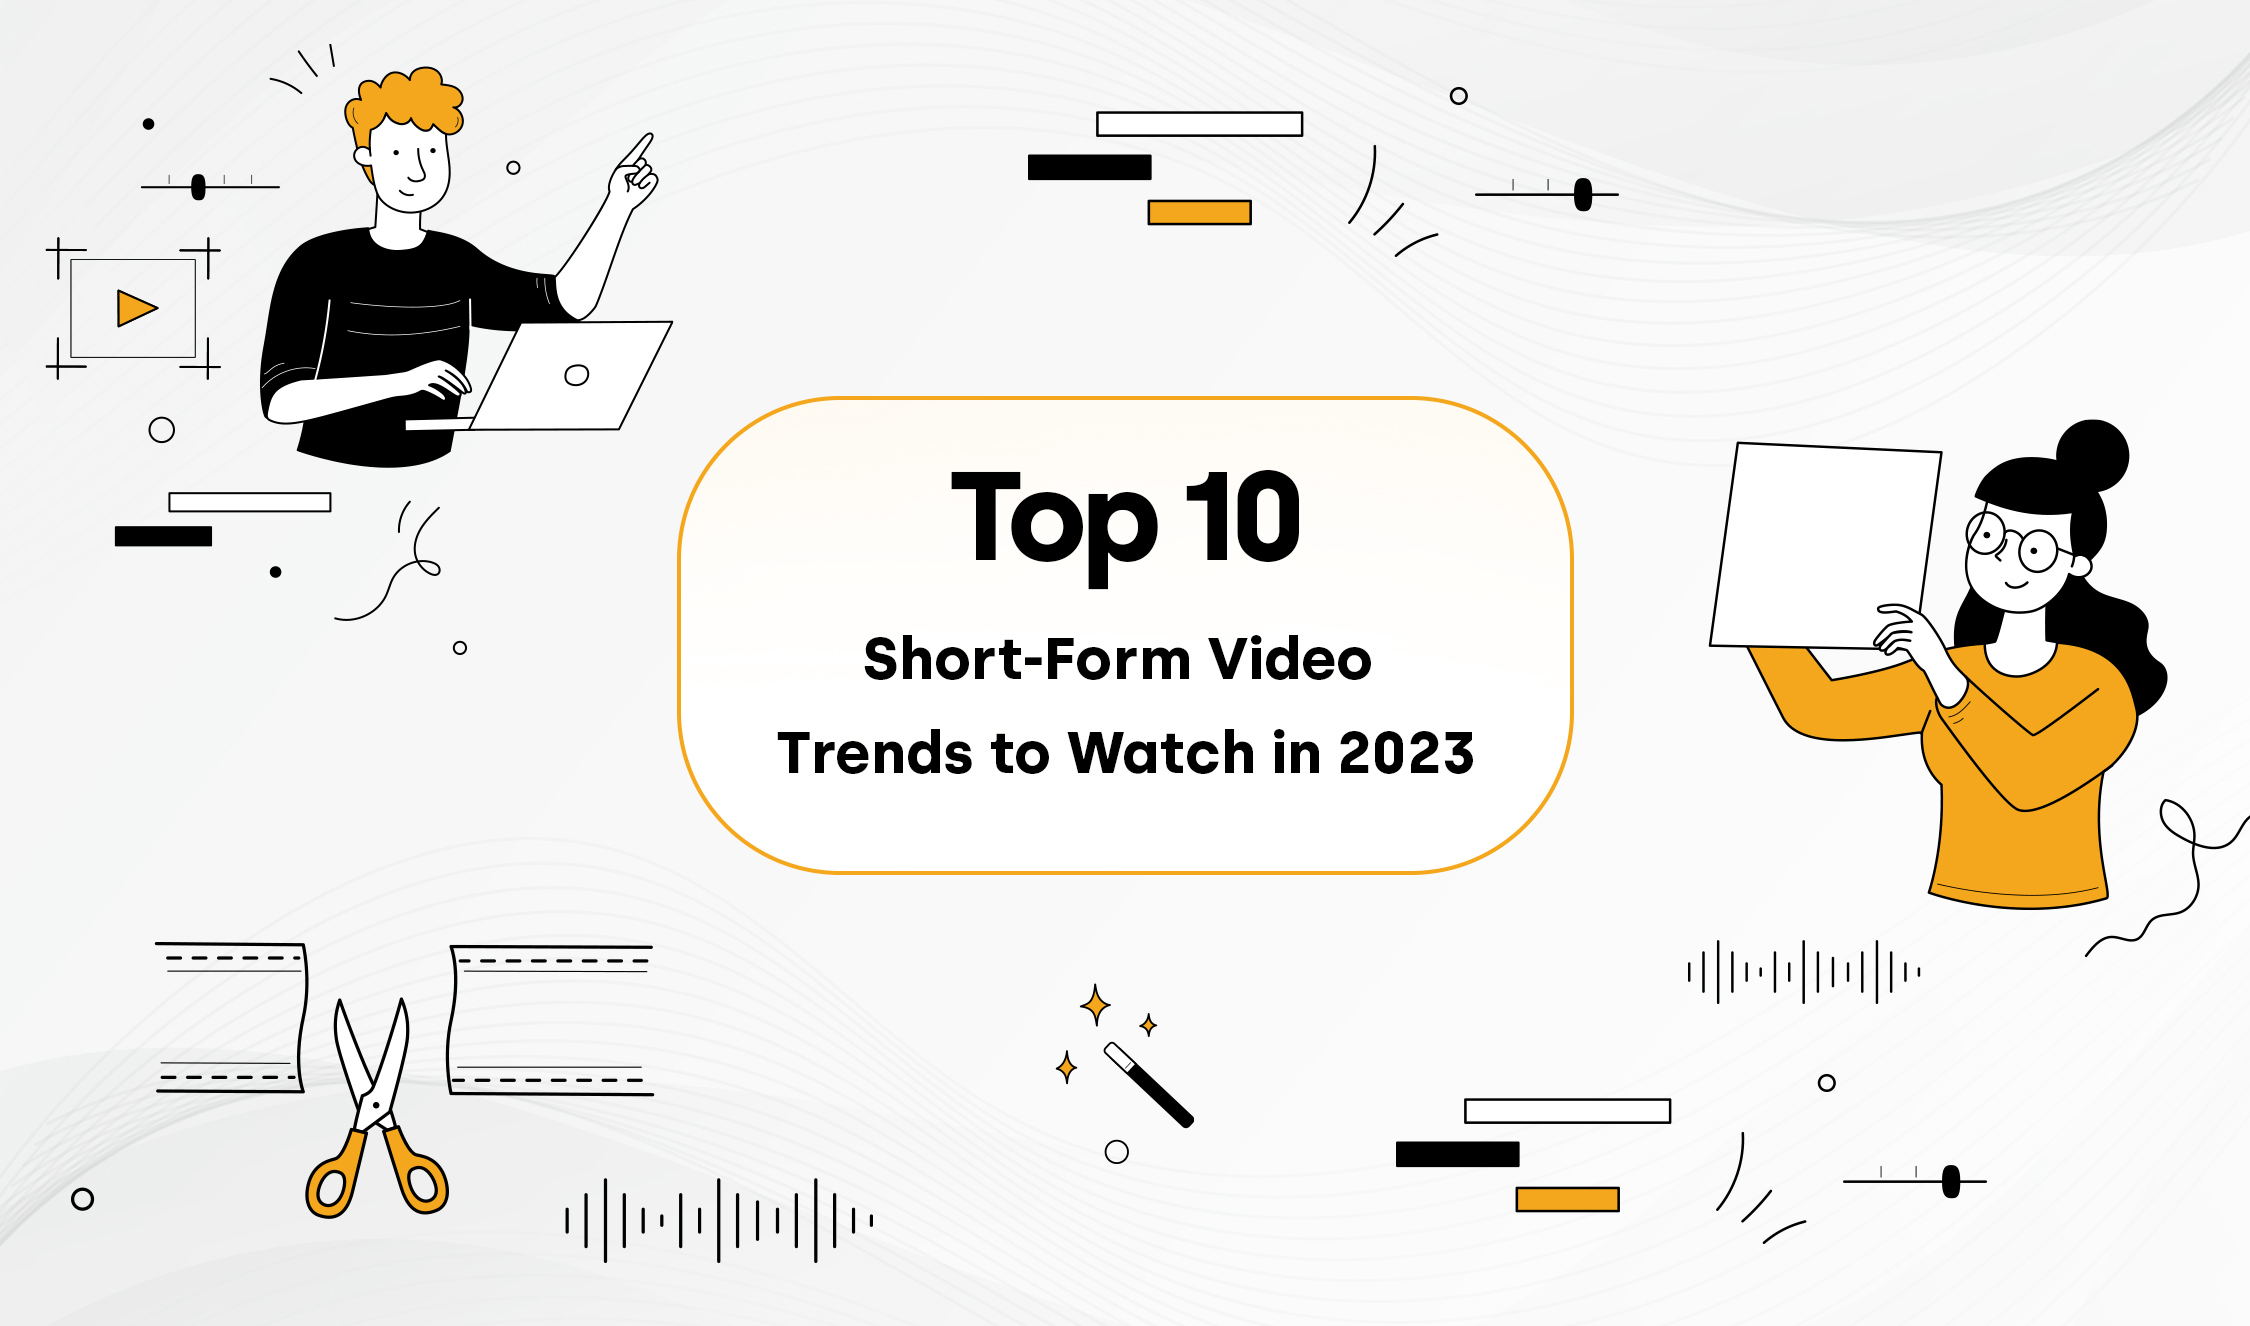 Top 10 Short-Form Video Trends to Watch in 2023